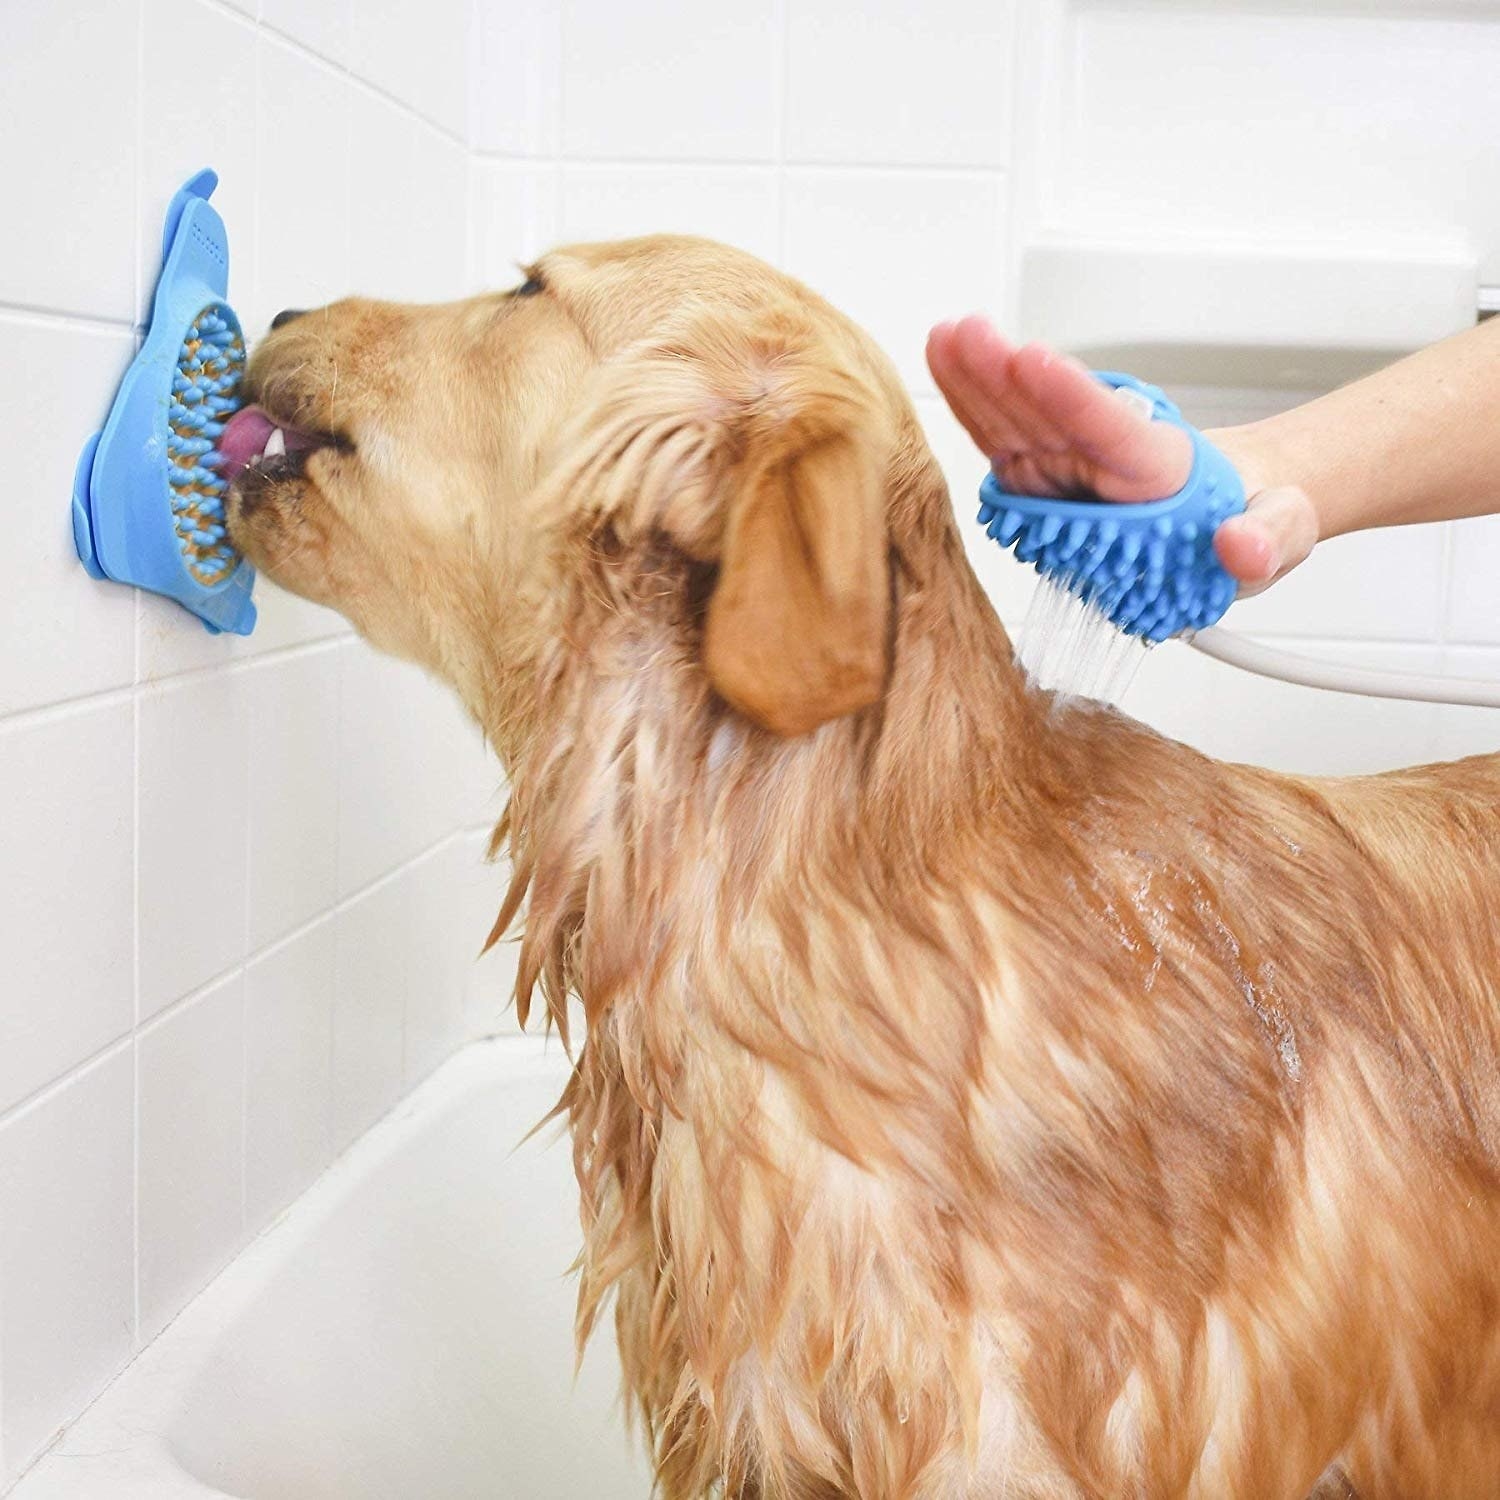 A dog licking the triangular mat while being bathed